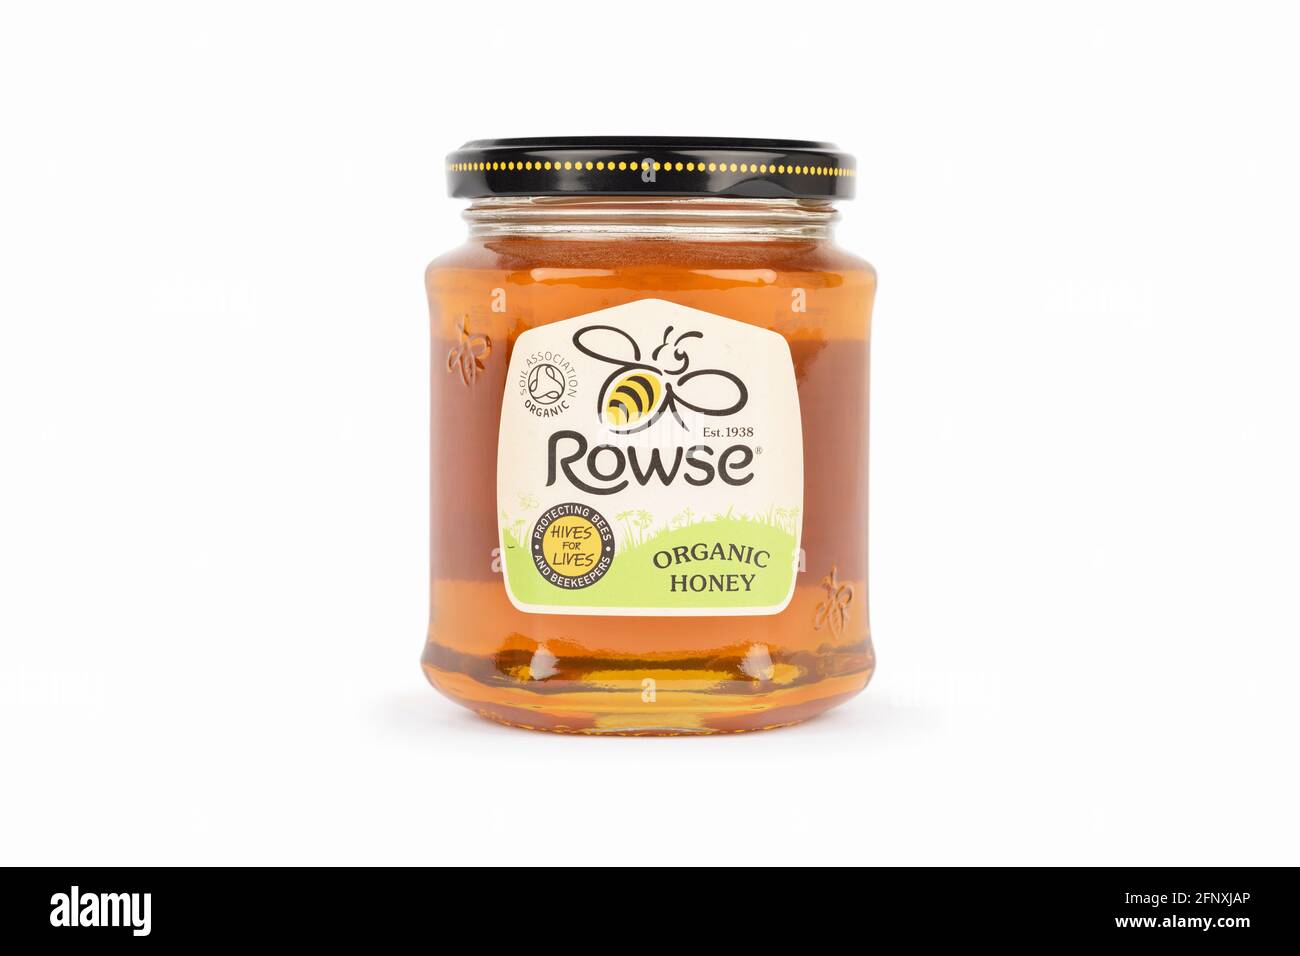 A jar of Rowse organic honey shot on a white background. Stock Photo